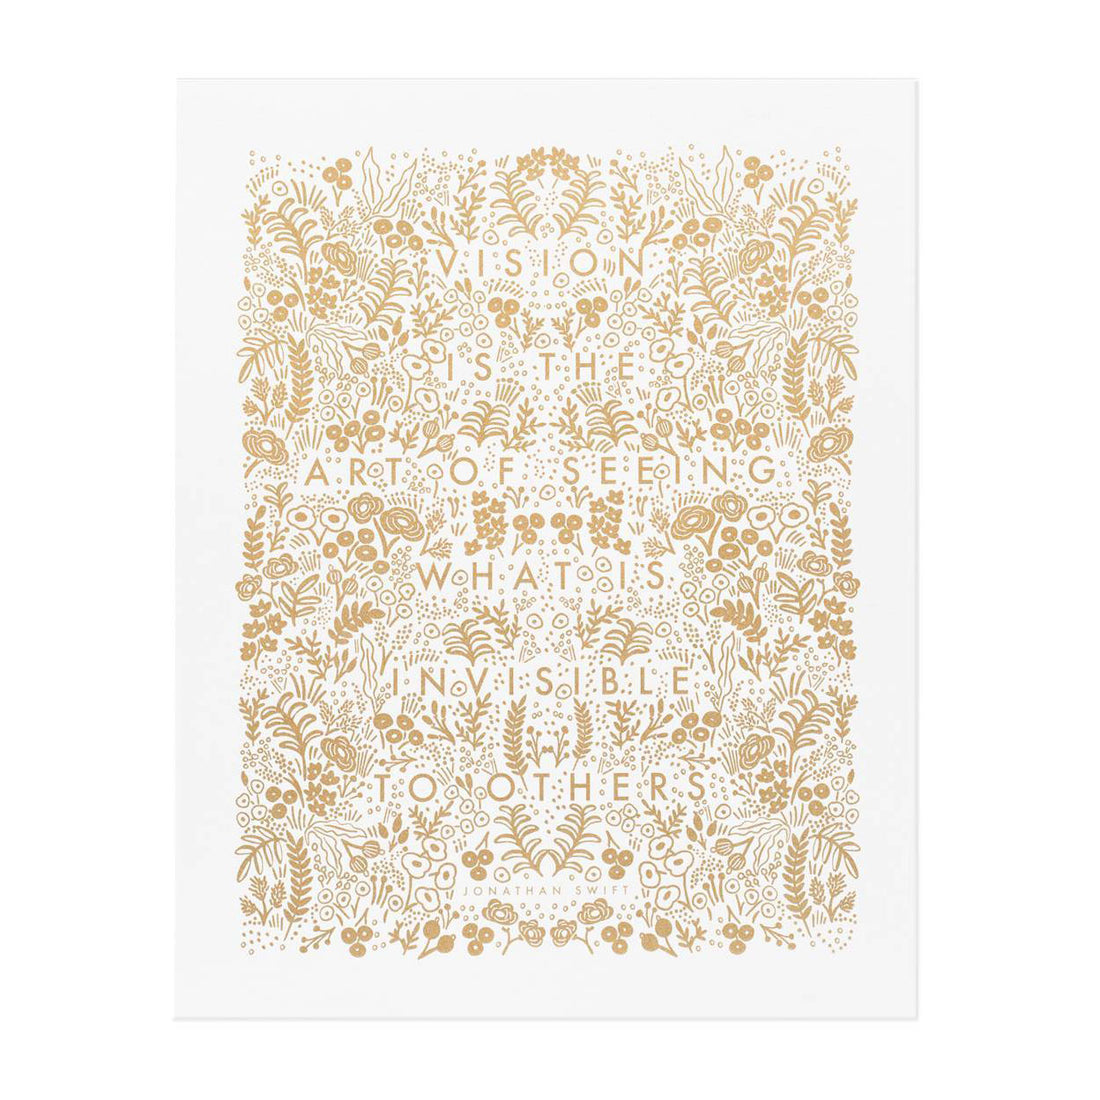 rifle-paper-co-art-of-seeing-print-white-01